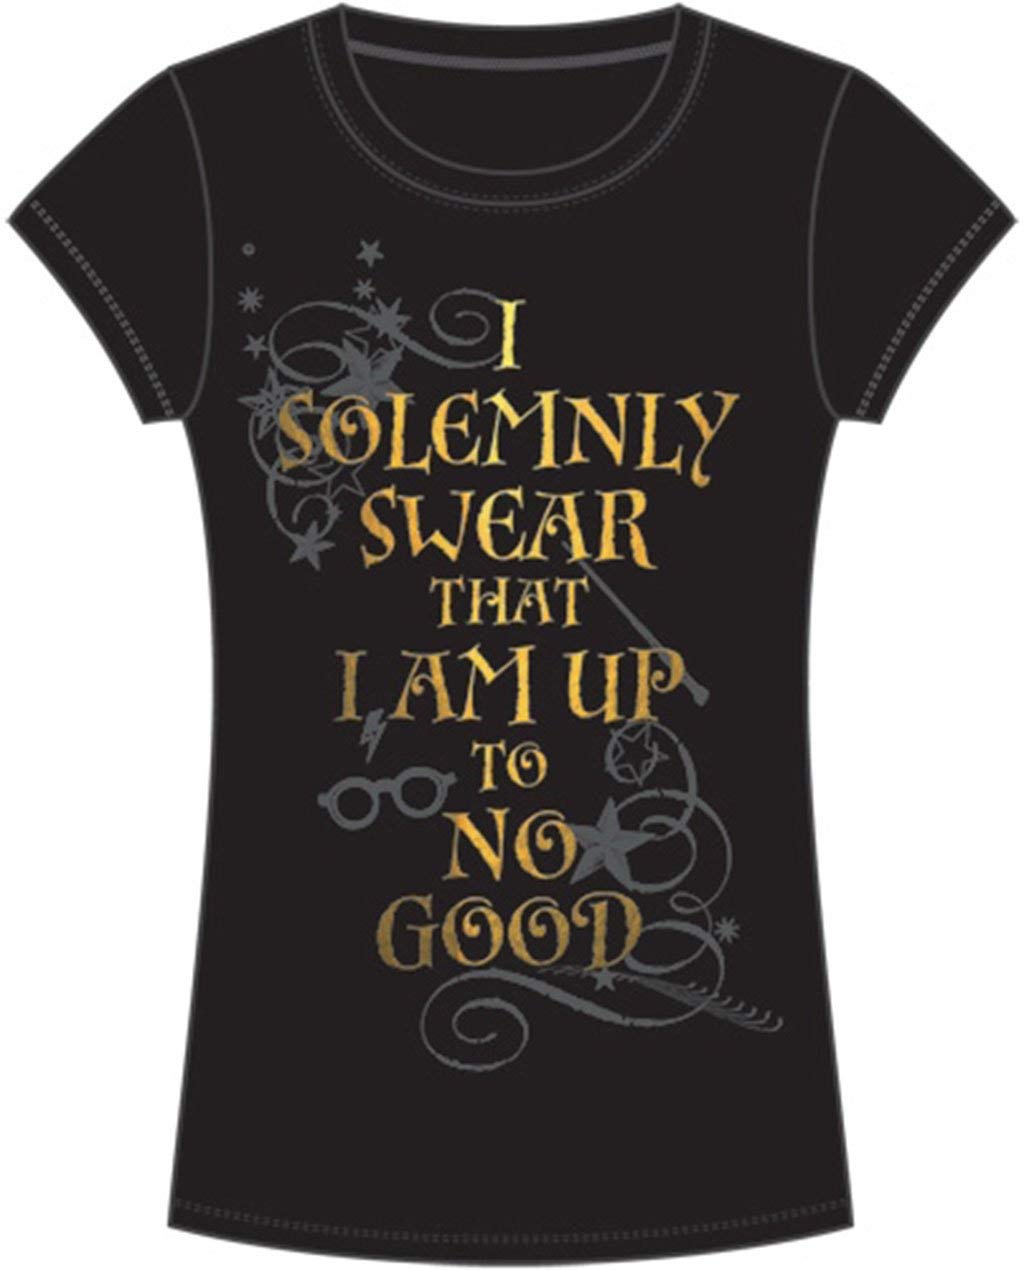 Book Cover Disney Harry Potter Solemnly Swear Adult Junior Fashion Top Black